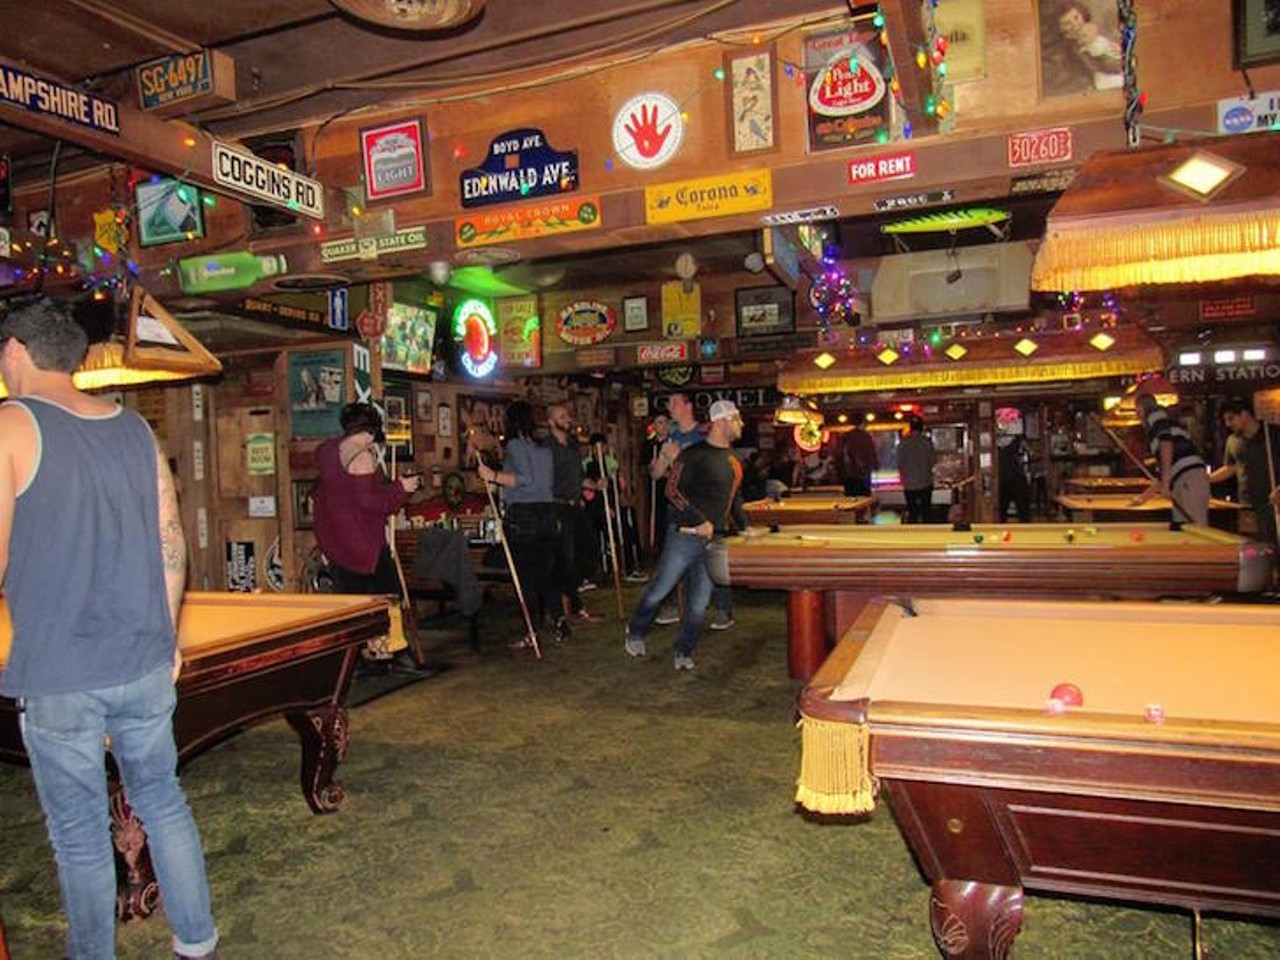 Sportstown  
2414 E Robinson St., 407-894-6258
Existing since 1958, this pool hall offers craft beers, speciality sandwiches and drink specials every night. This is a place to challenge your pool skills, pinball or maybe even ping pong while drinking from a selection over of 30 beers. 
Photo via Sportstown/Facebook 
Sportstown